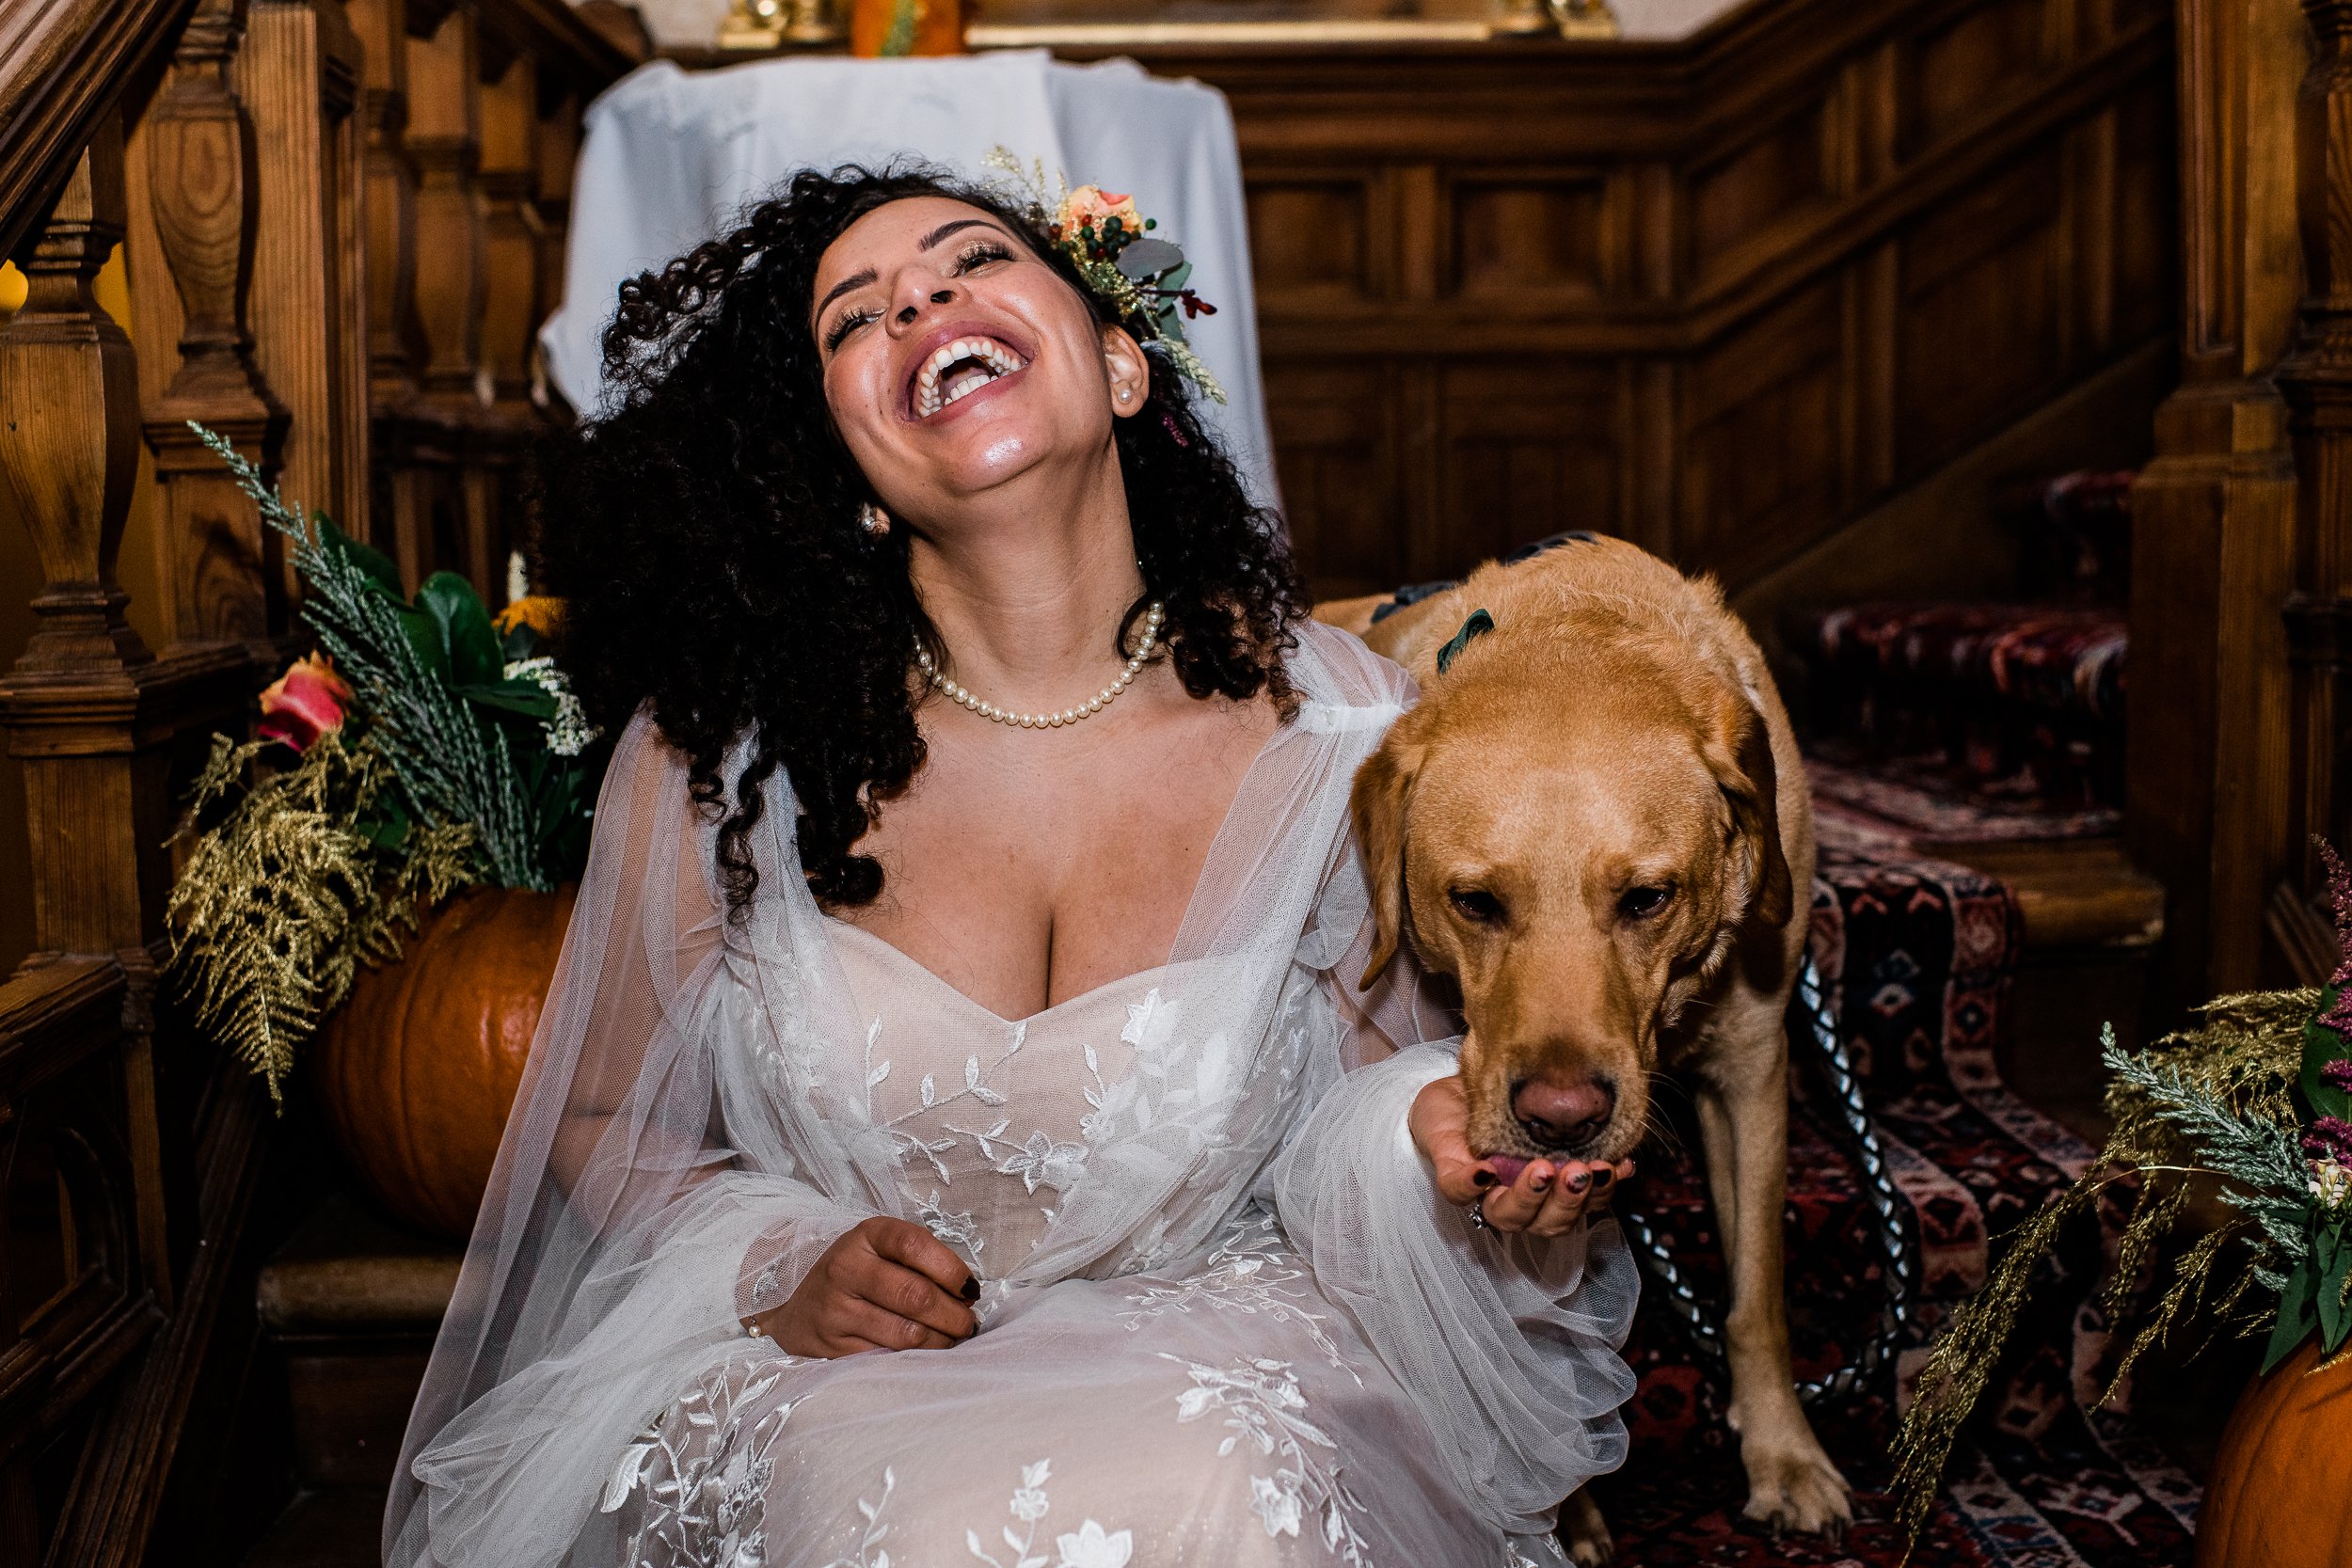 Bride with her dog